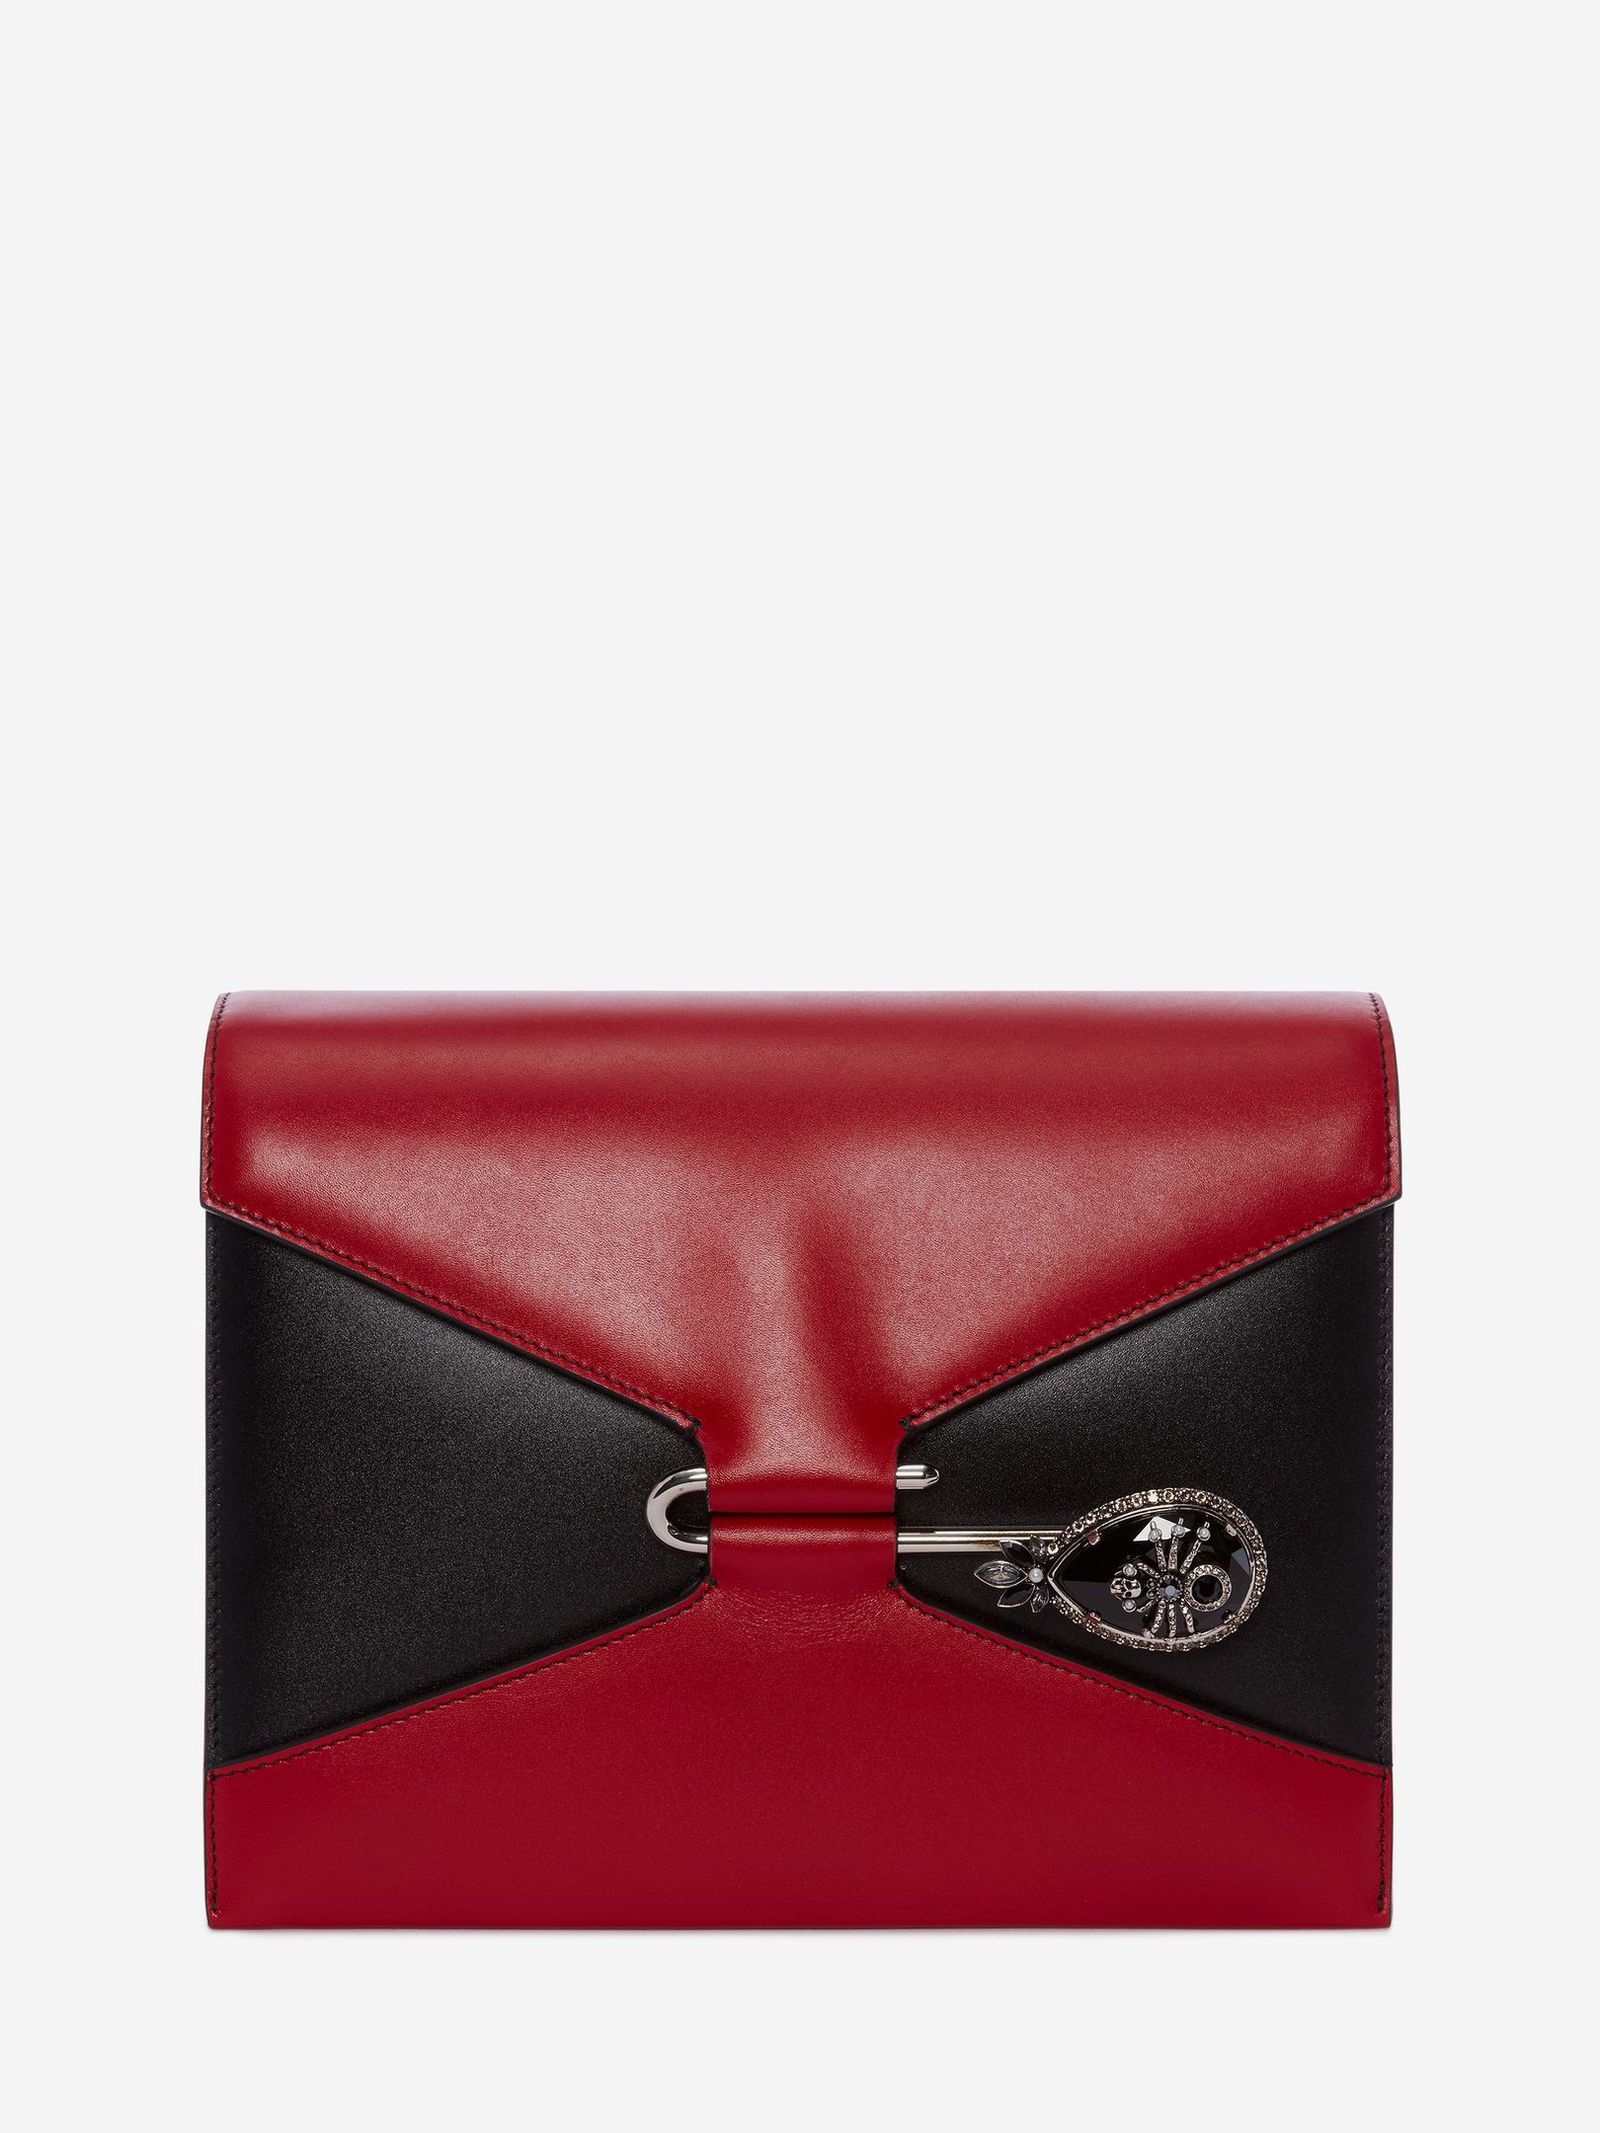 This New Alexander McQueen Bag Is About to Be Huge | Who What Wear